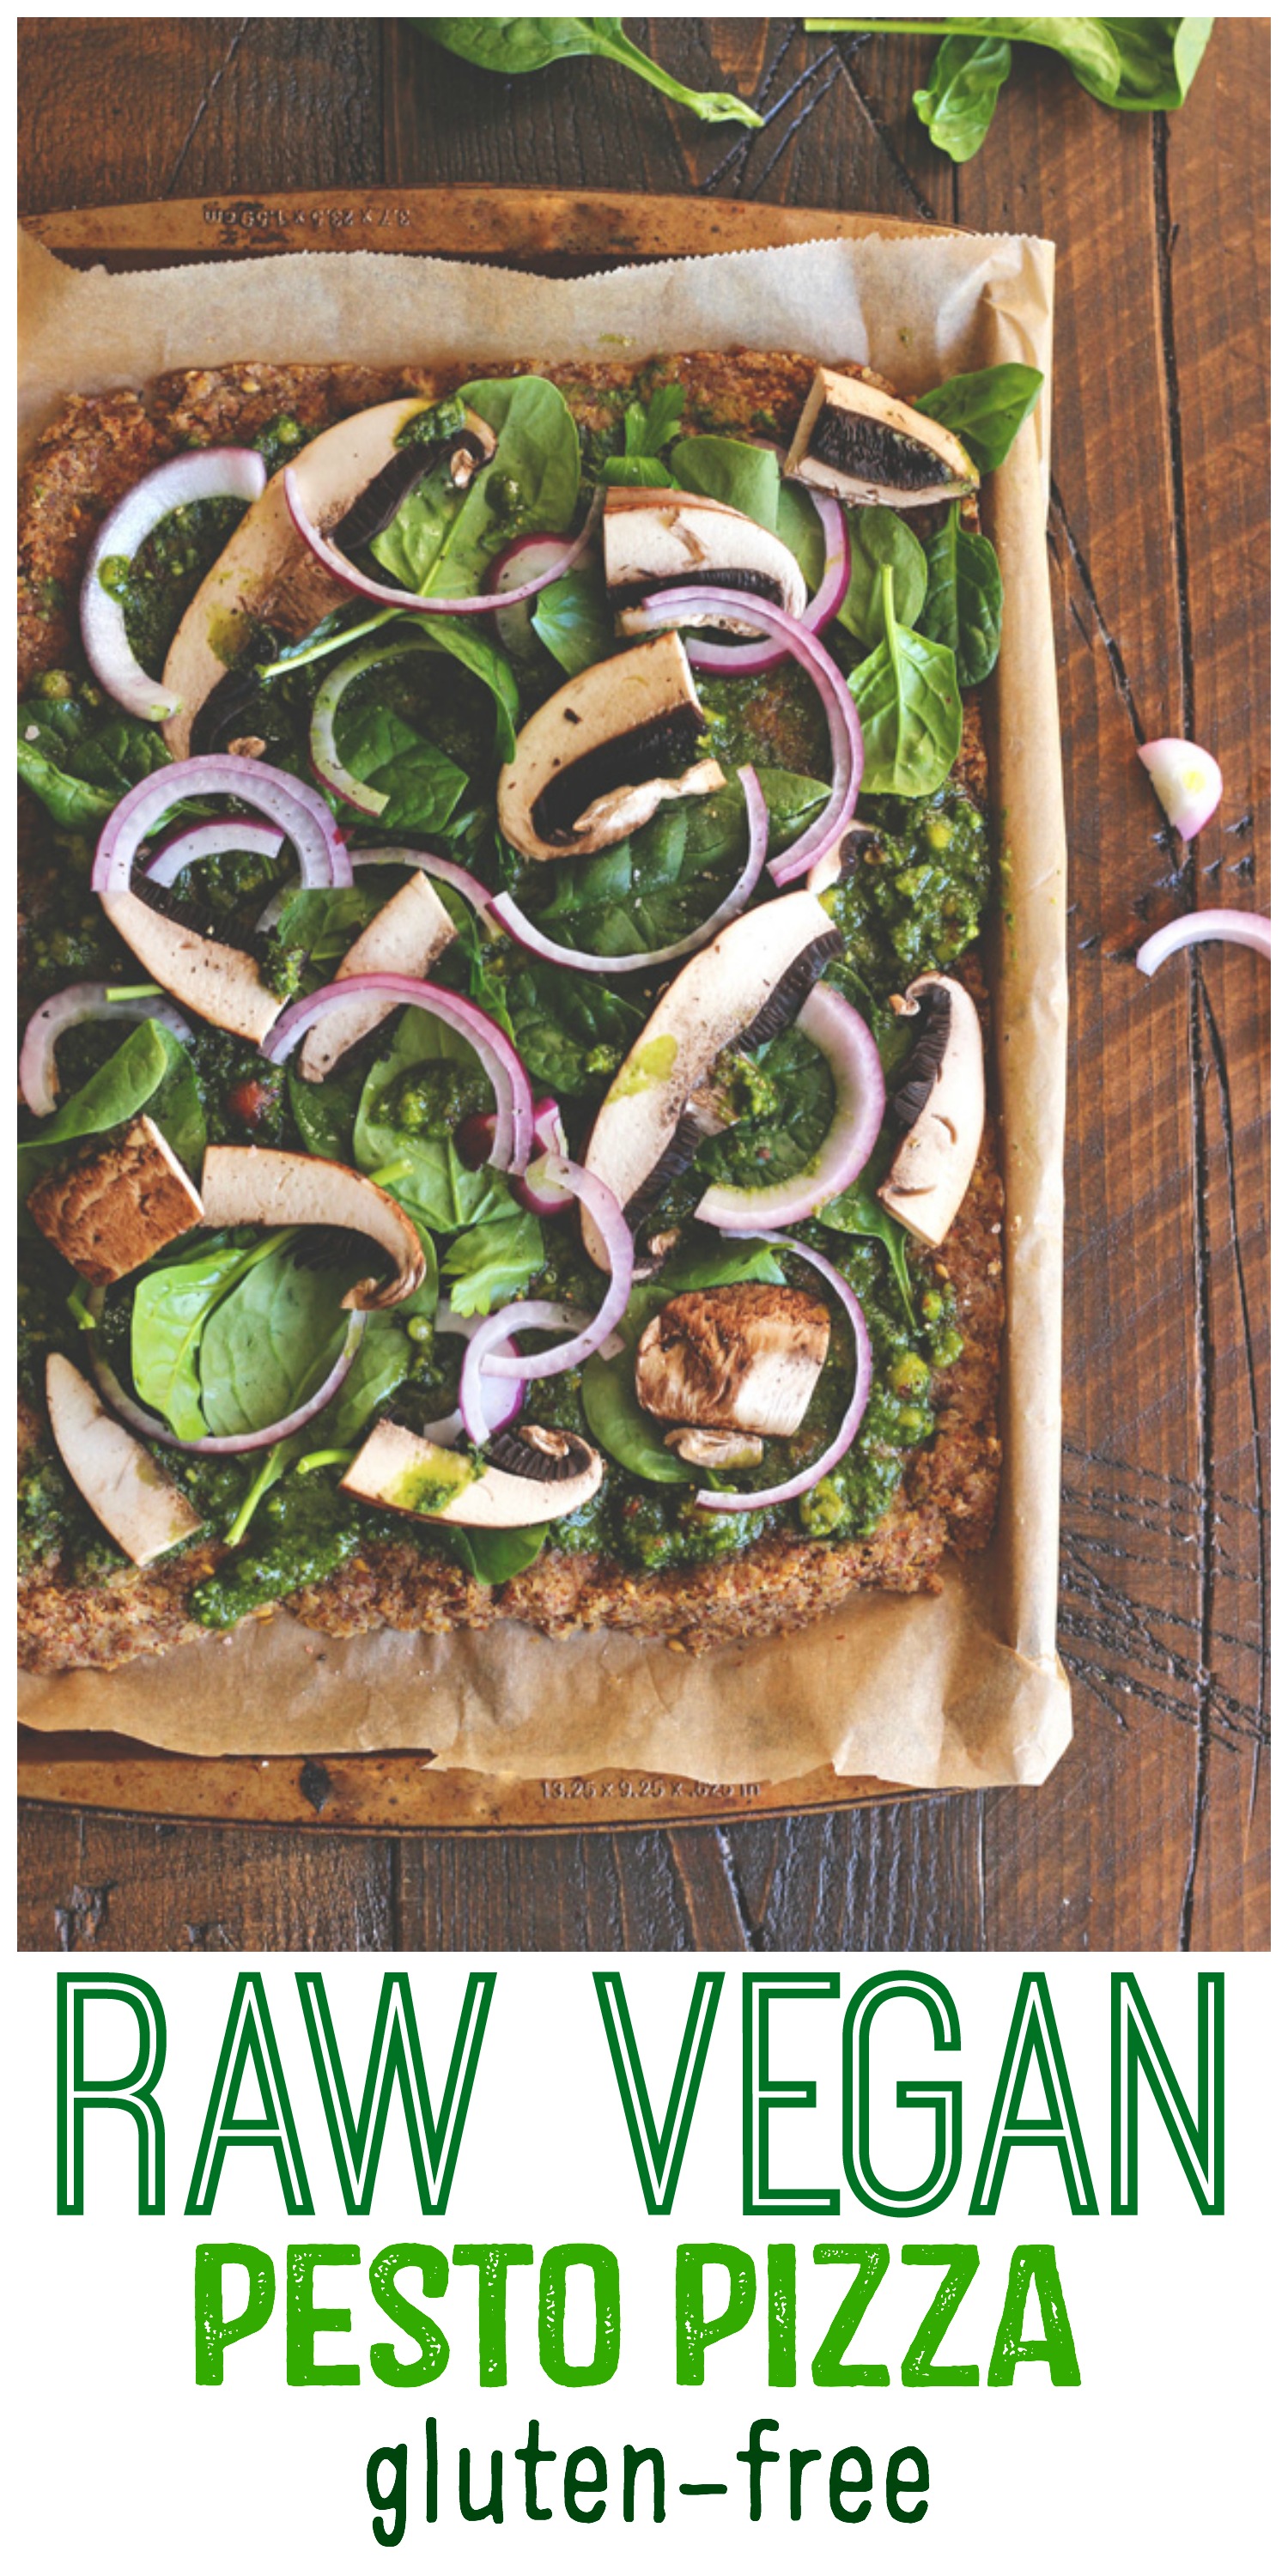 This pizza will hit the spot, it's satisfying, with the right amount of pesto and flavor. Jam packed with nutrients and one of many meals to share with the family after holidays full of sweets. NeuroticMommy.com #vegan #raw #healthy #pizza